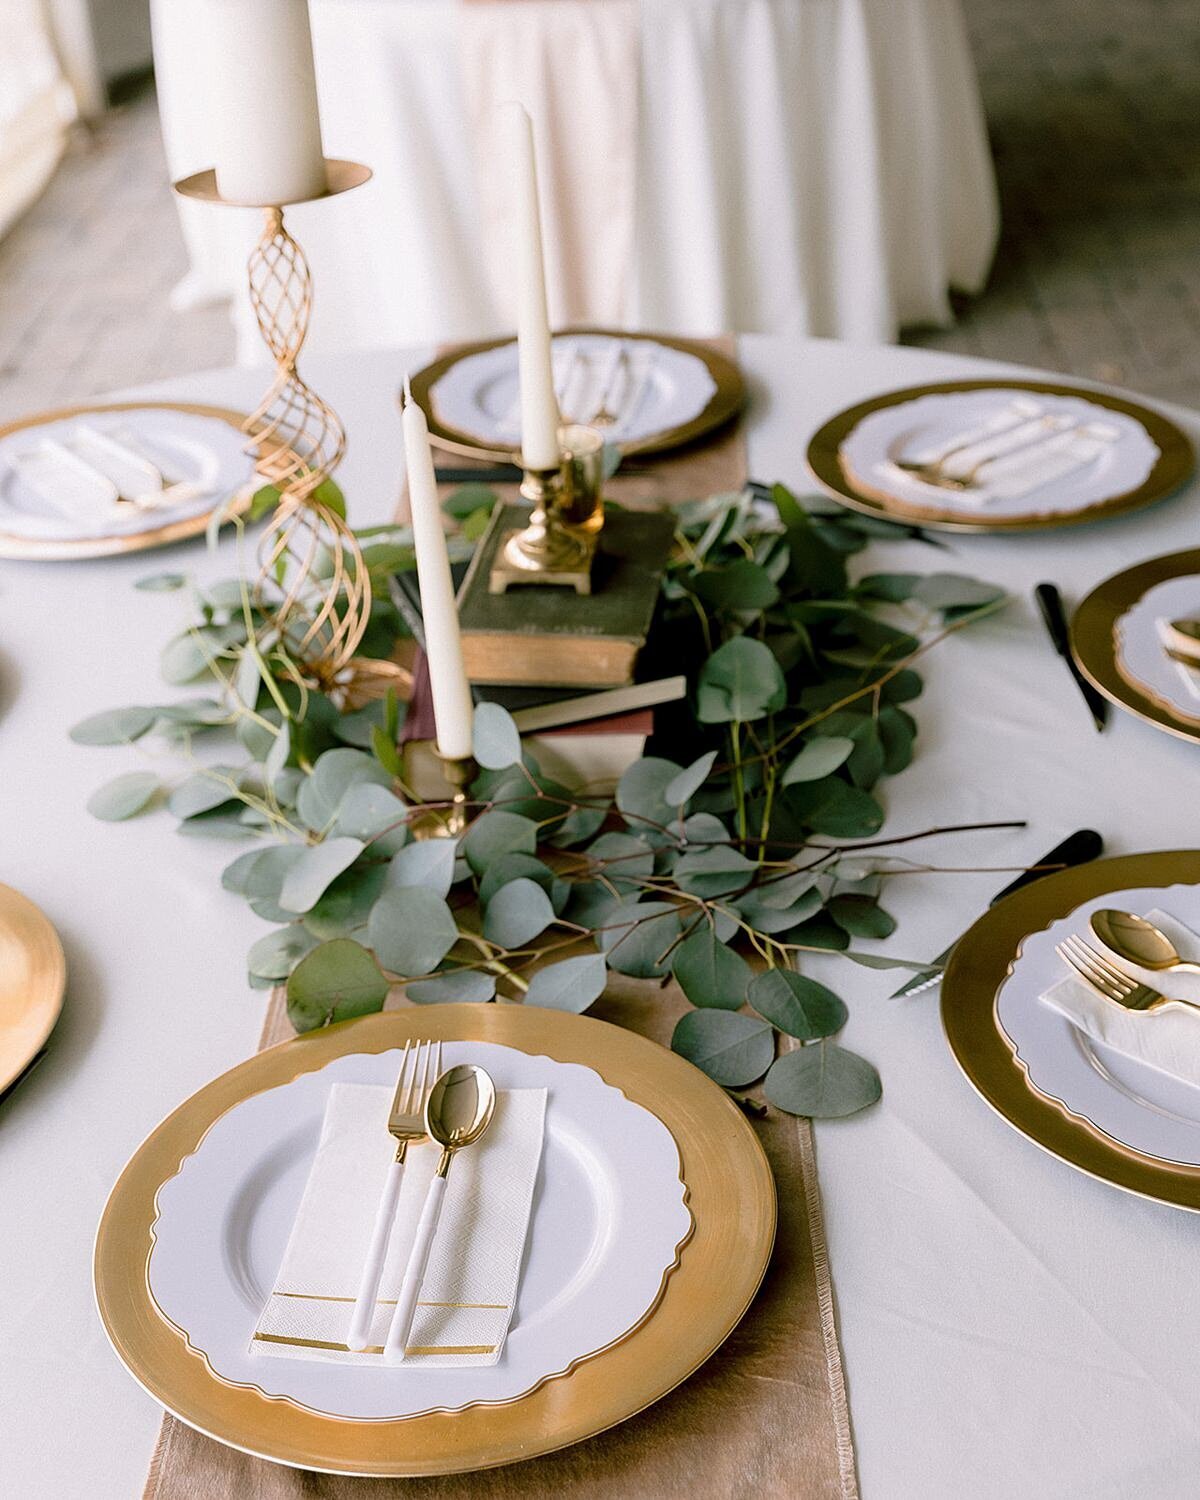 white table with gold charger and white scalloped edge plate with a napkin and white and gold flatware in the center. The table has a white linen with a gold table runner. The centerpiece is a stack of antique books surrounded by eucalyptus and white candles in gold candlesticks.